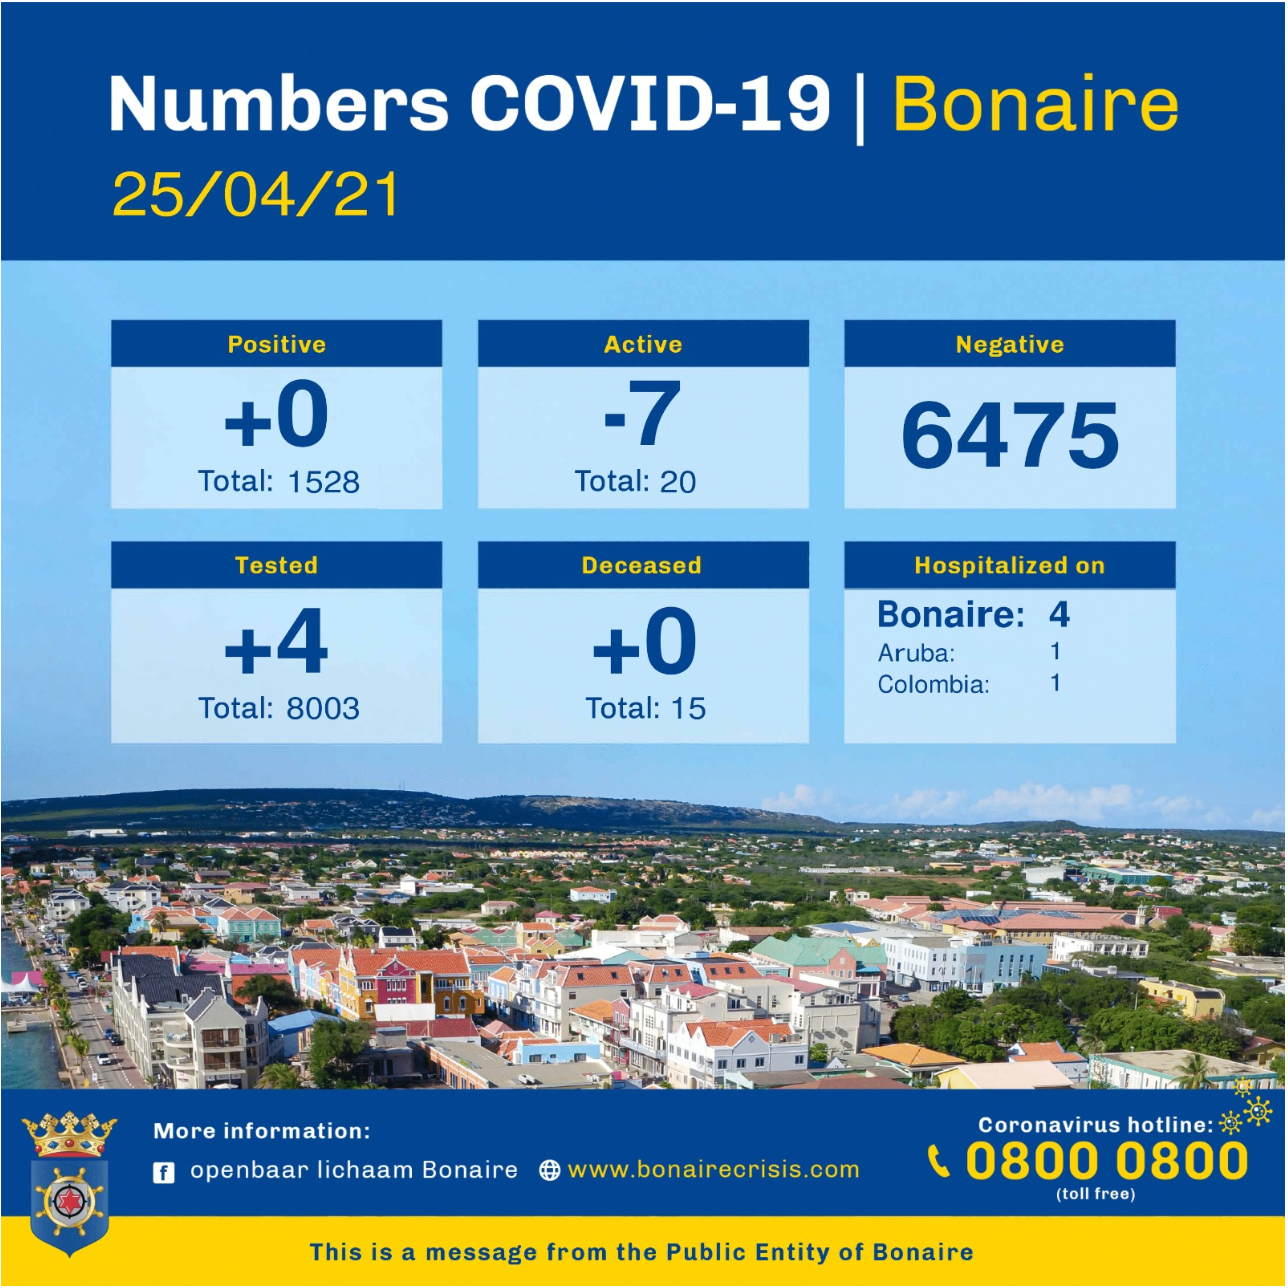 Only 20 Active Covid-cases left on Bonaire